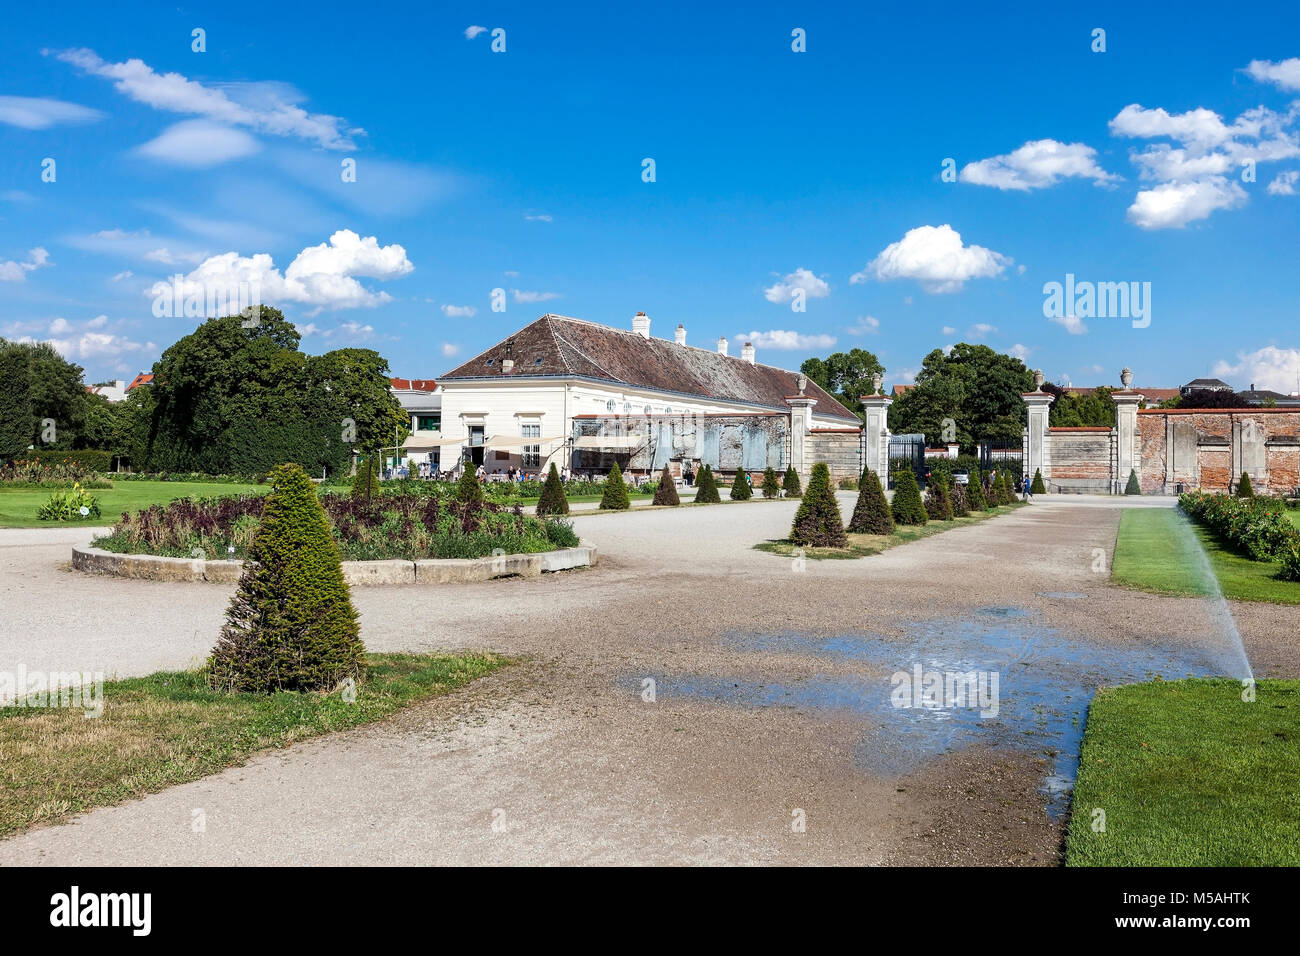 Augarten with the Augarten Cafe Restaurant. The Augarten park is a public park situated in the second district of Vienna Austria Stock Photo